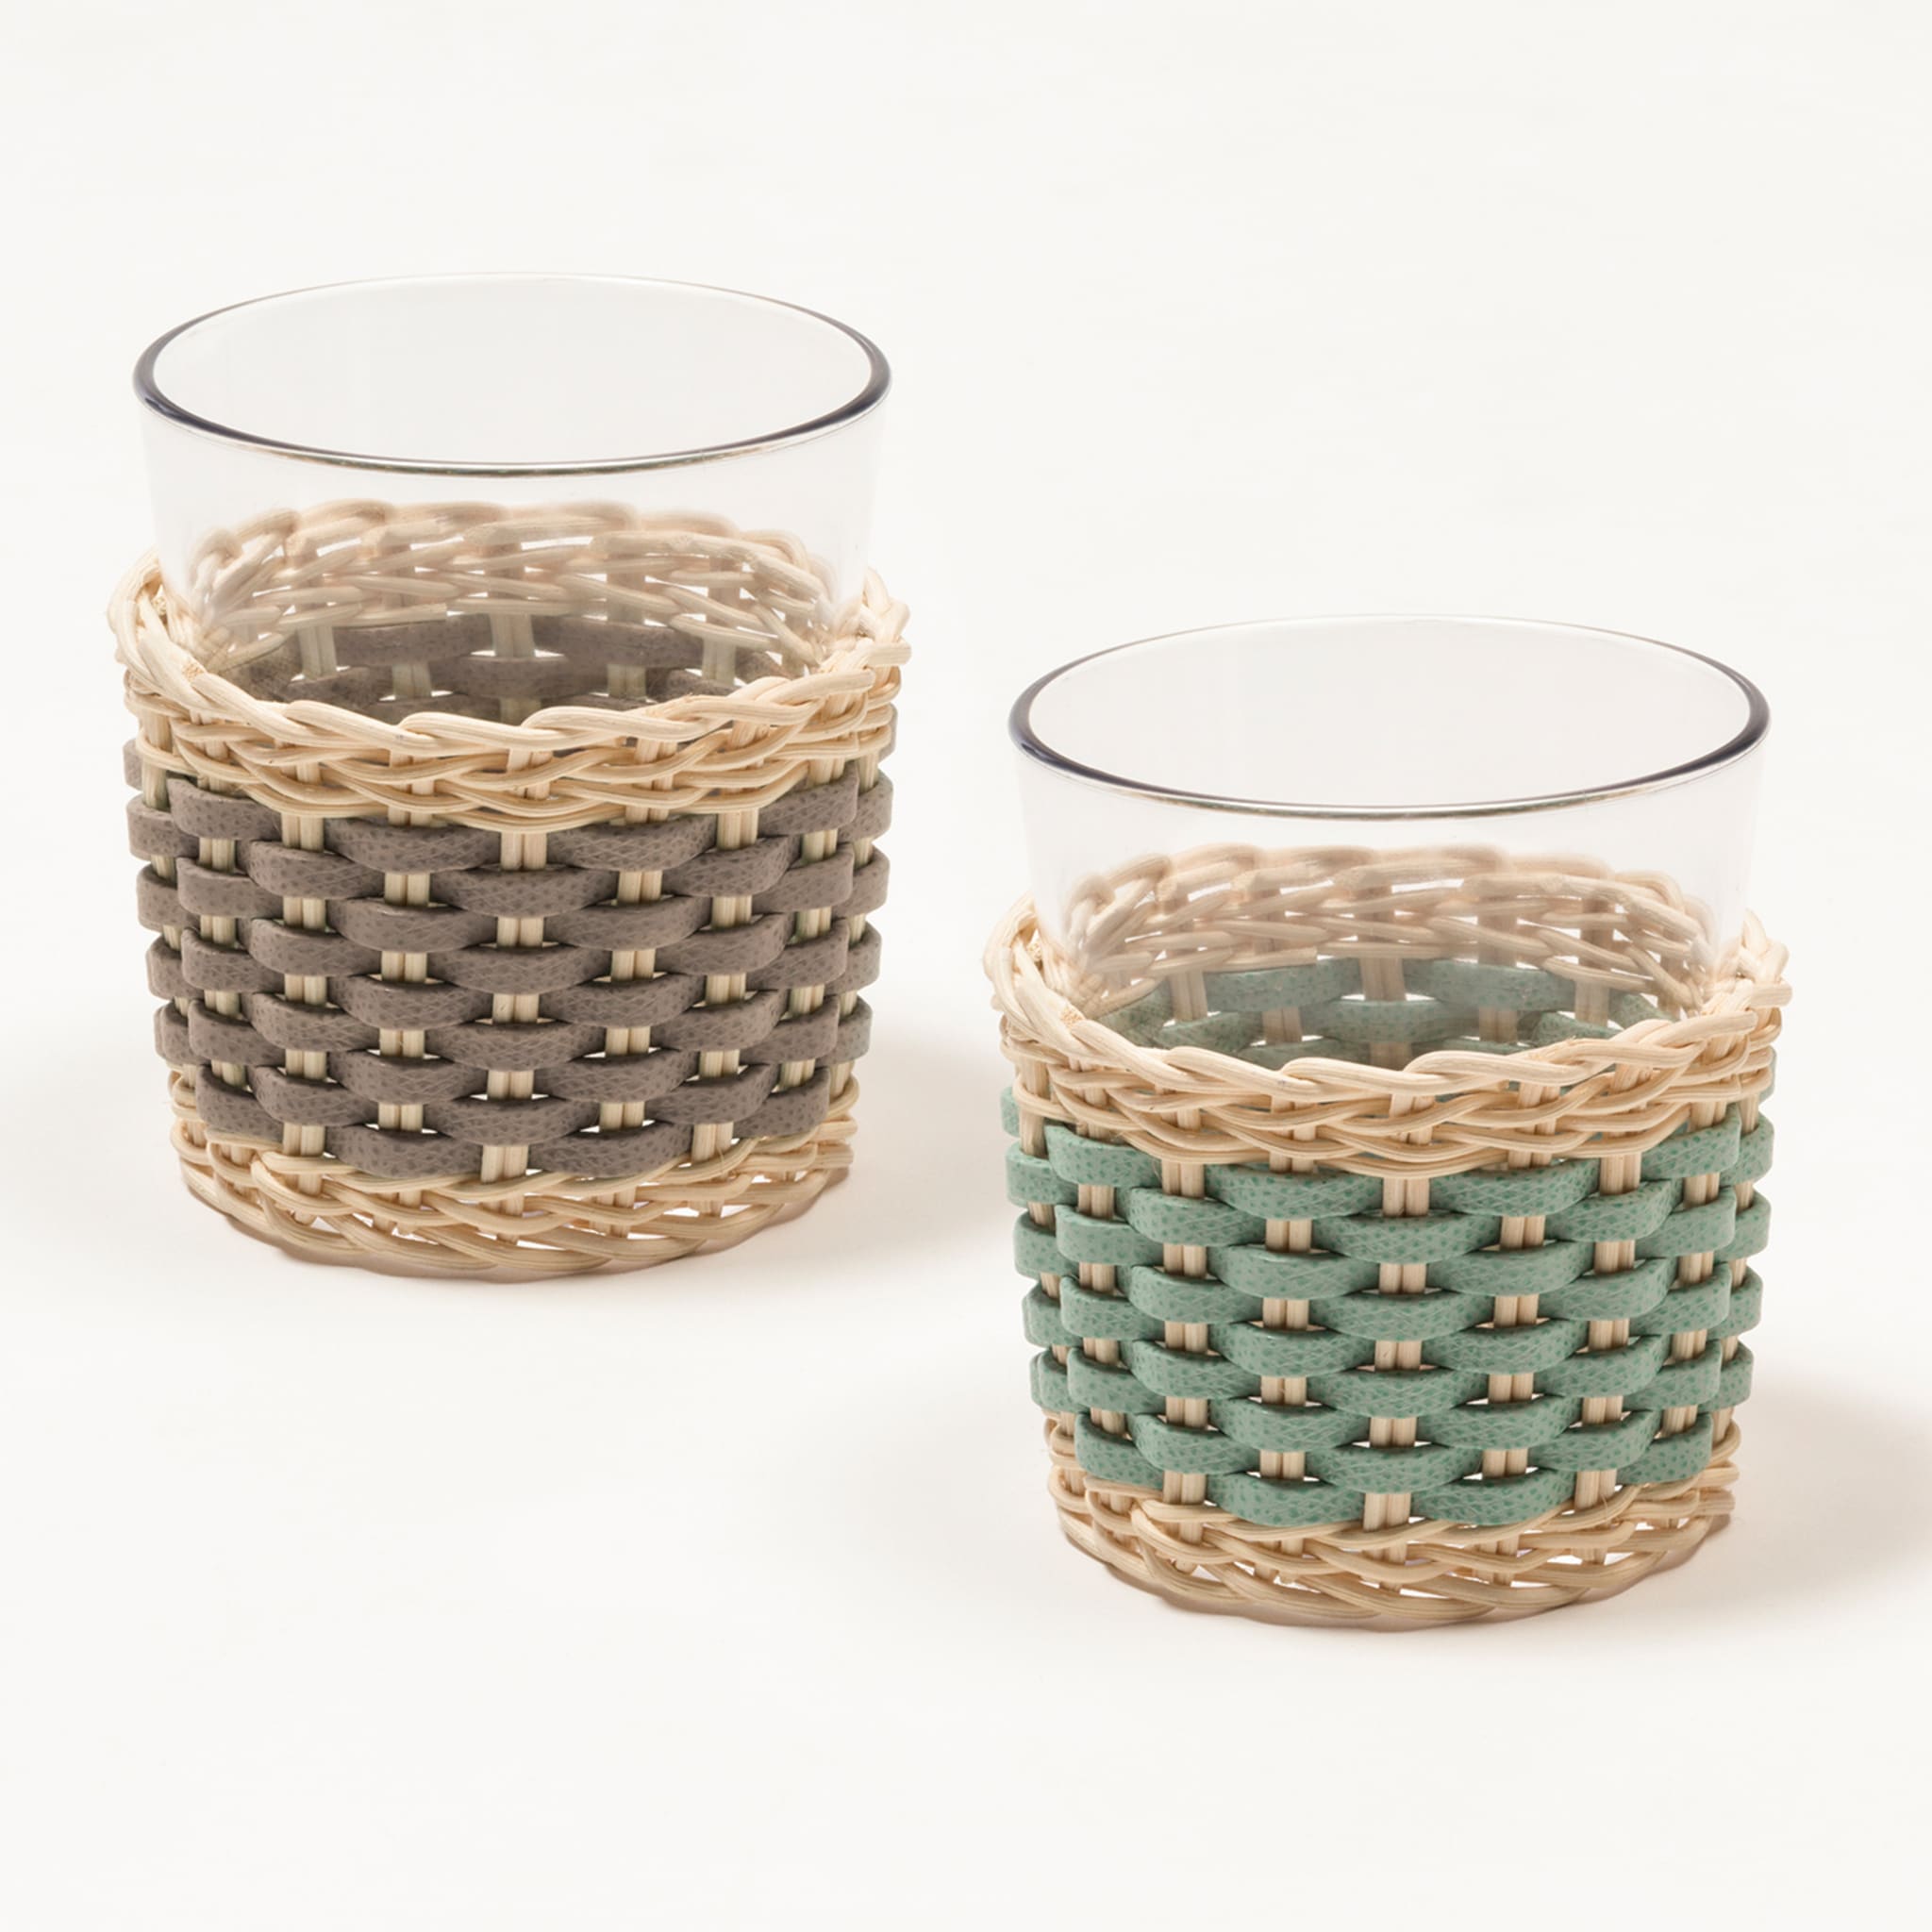 Anney Leather & Rattan Cup - Beige - Alternative view 1